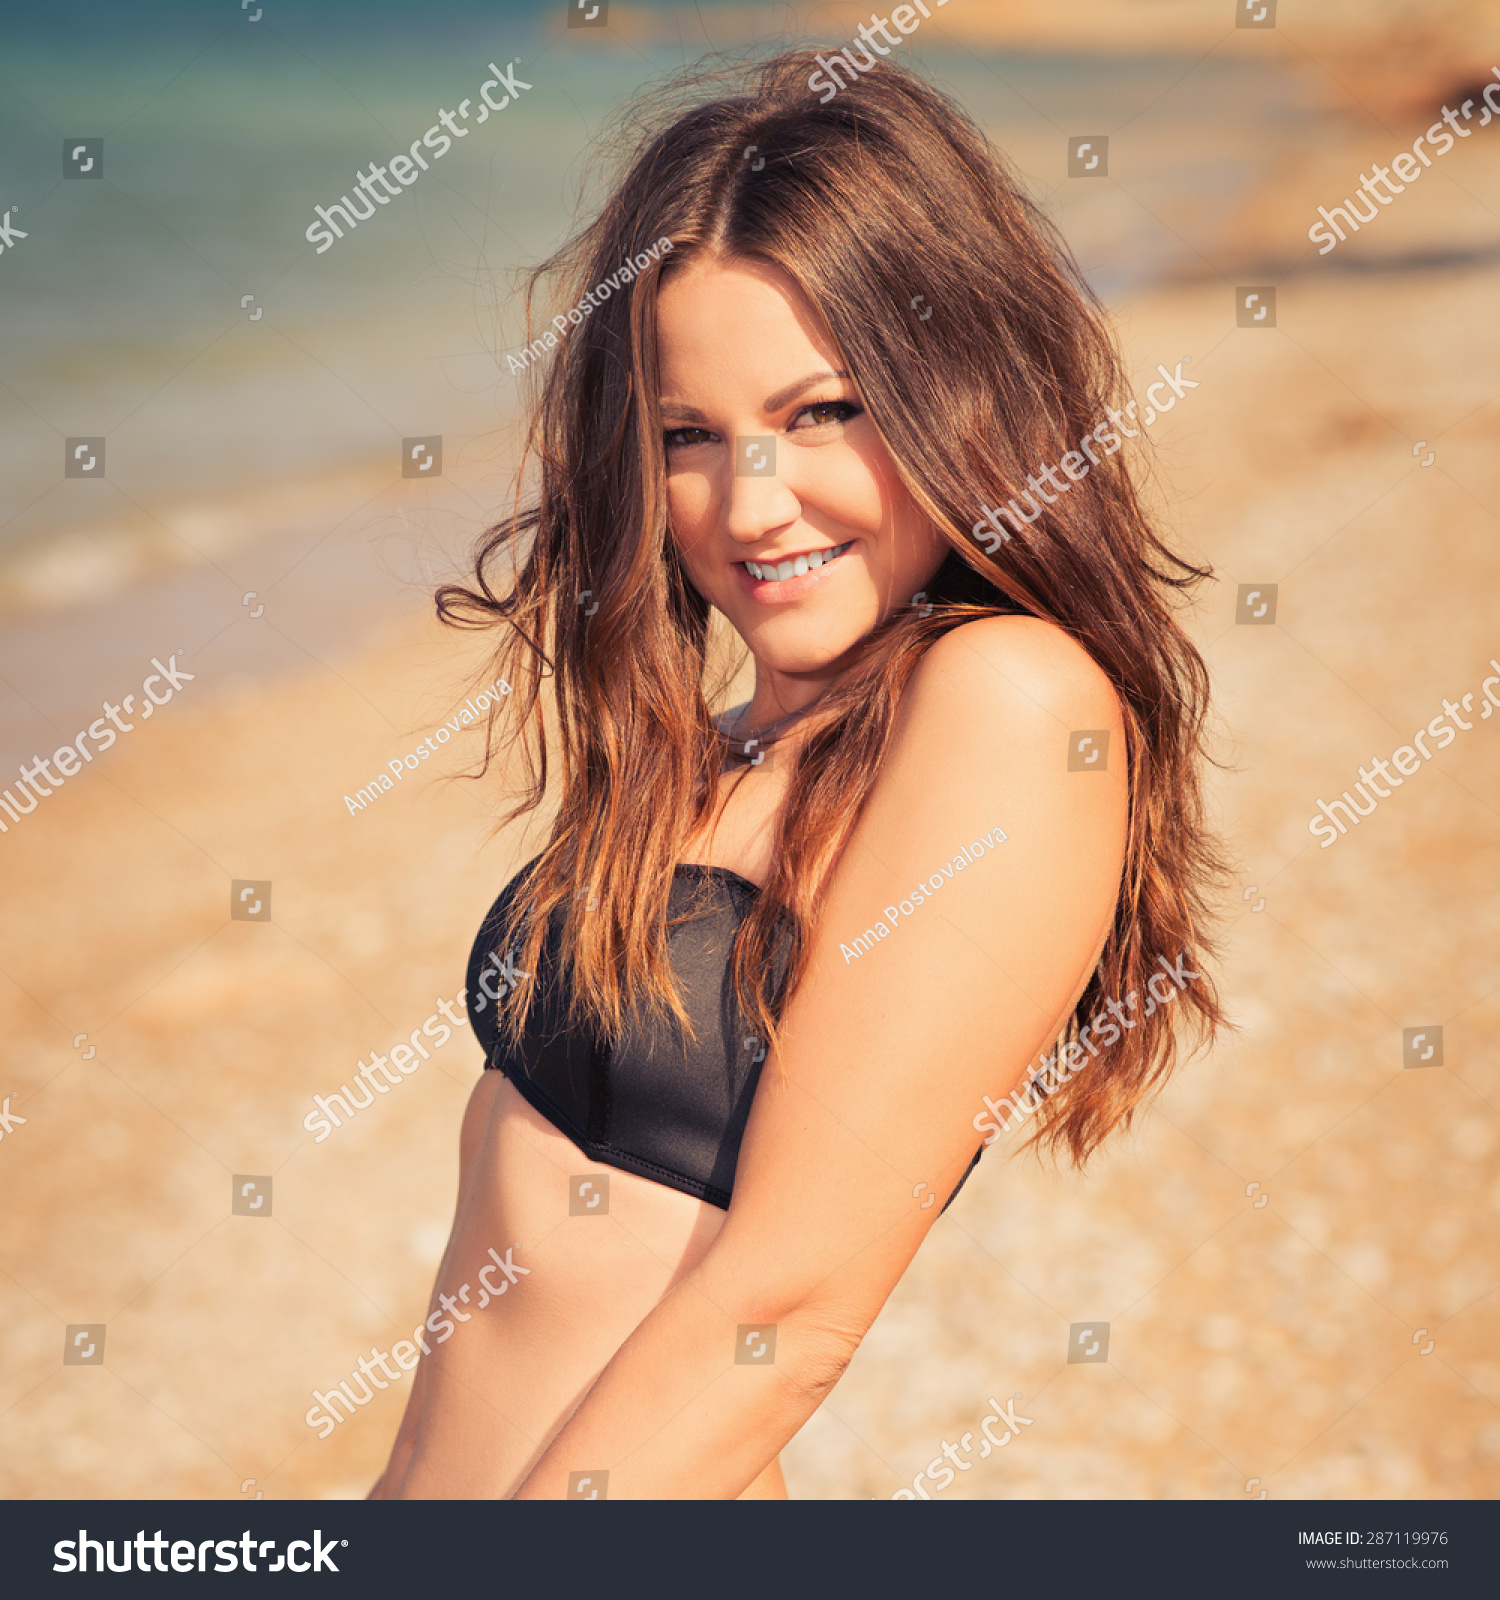 Fashion summer outdoor portrait of beautiful young woman. Hipster style. young pretty girl with long hair posing at beach. Photo with instagram style filters #287119976